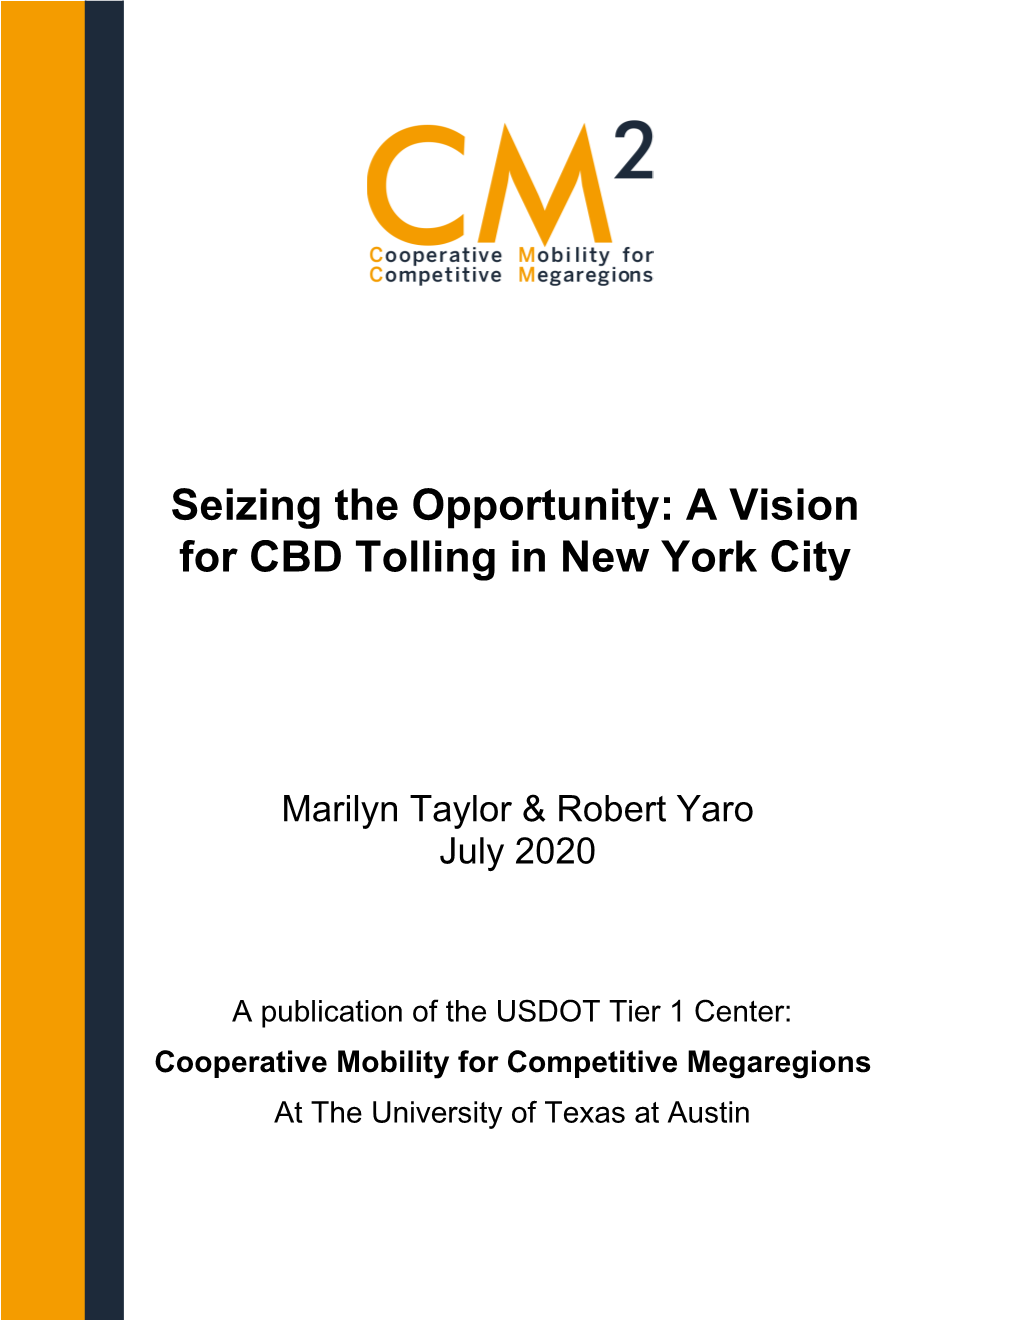 Seizing the Opportunity: a Vision for CBD Tolling in New York City